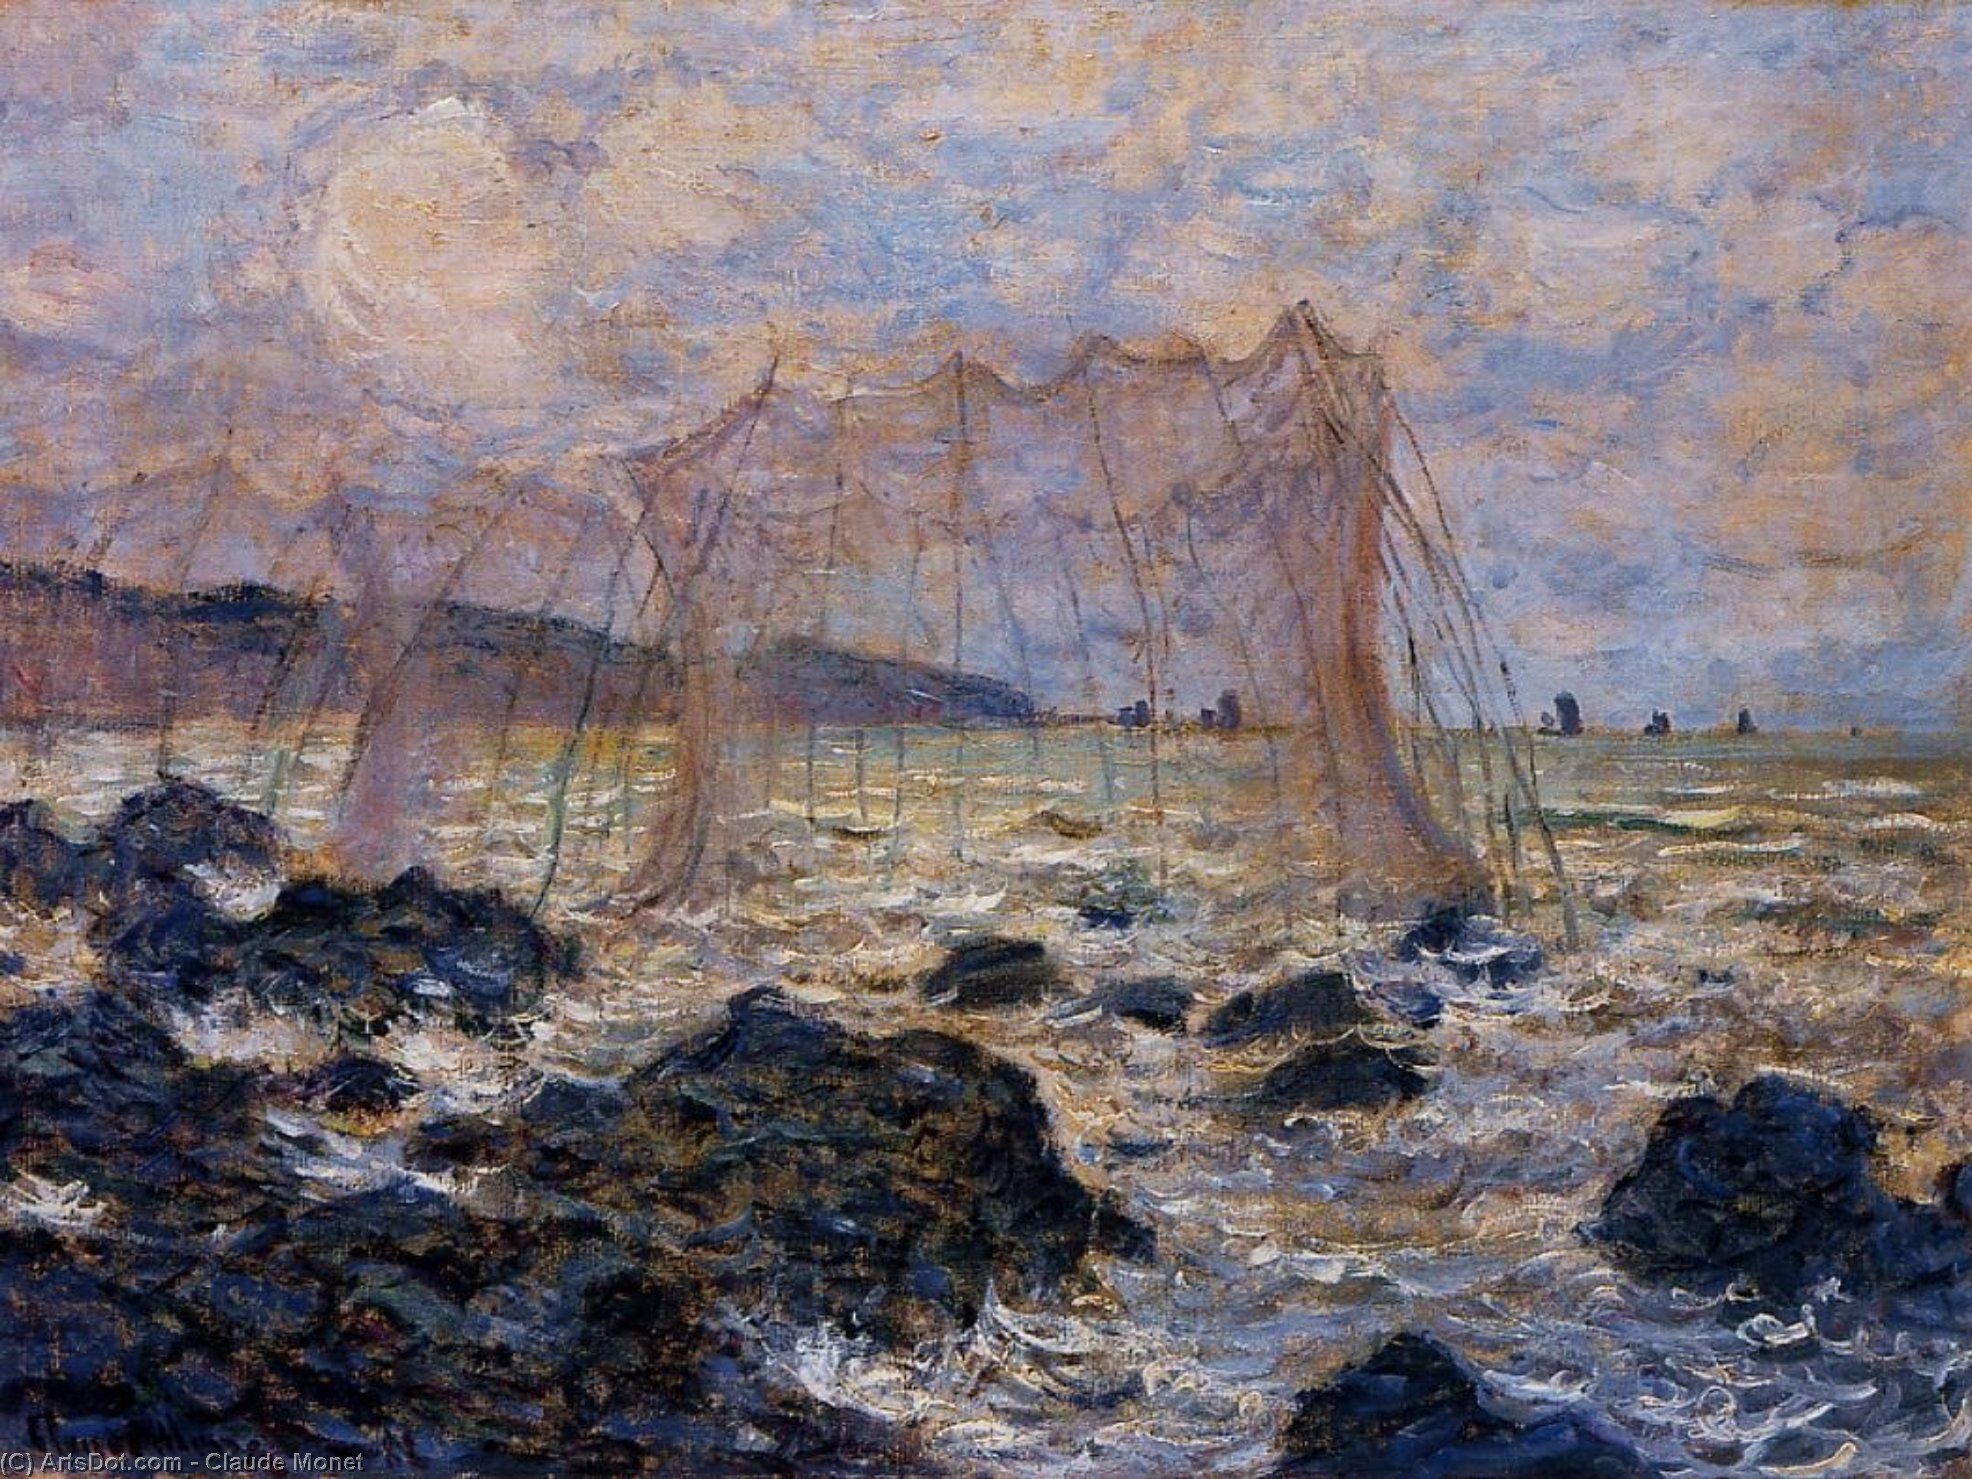 Order Paintings Reproductions Fishing Nets at Pourville, 1882 by Claude Monet (1840-1926, France) | ArtsDot.com